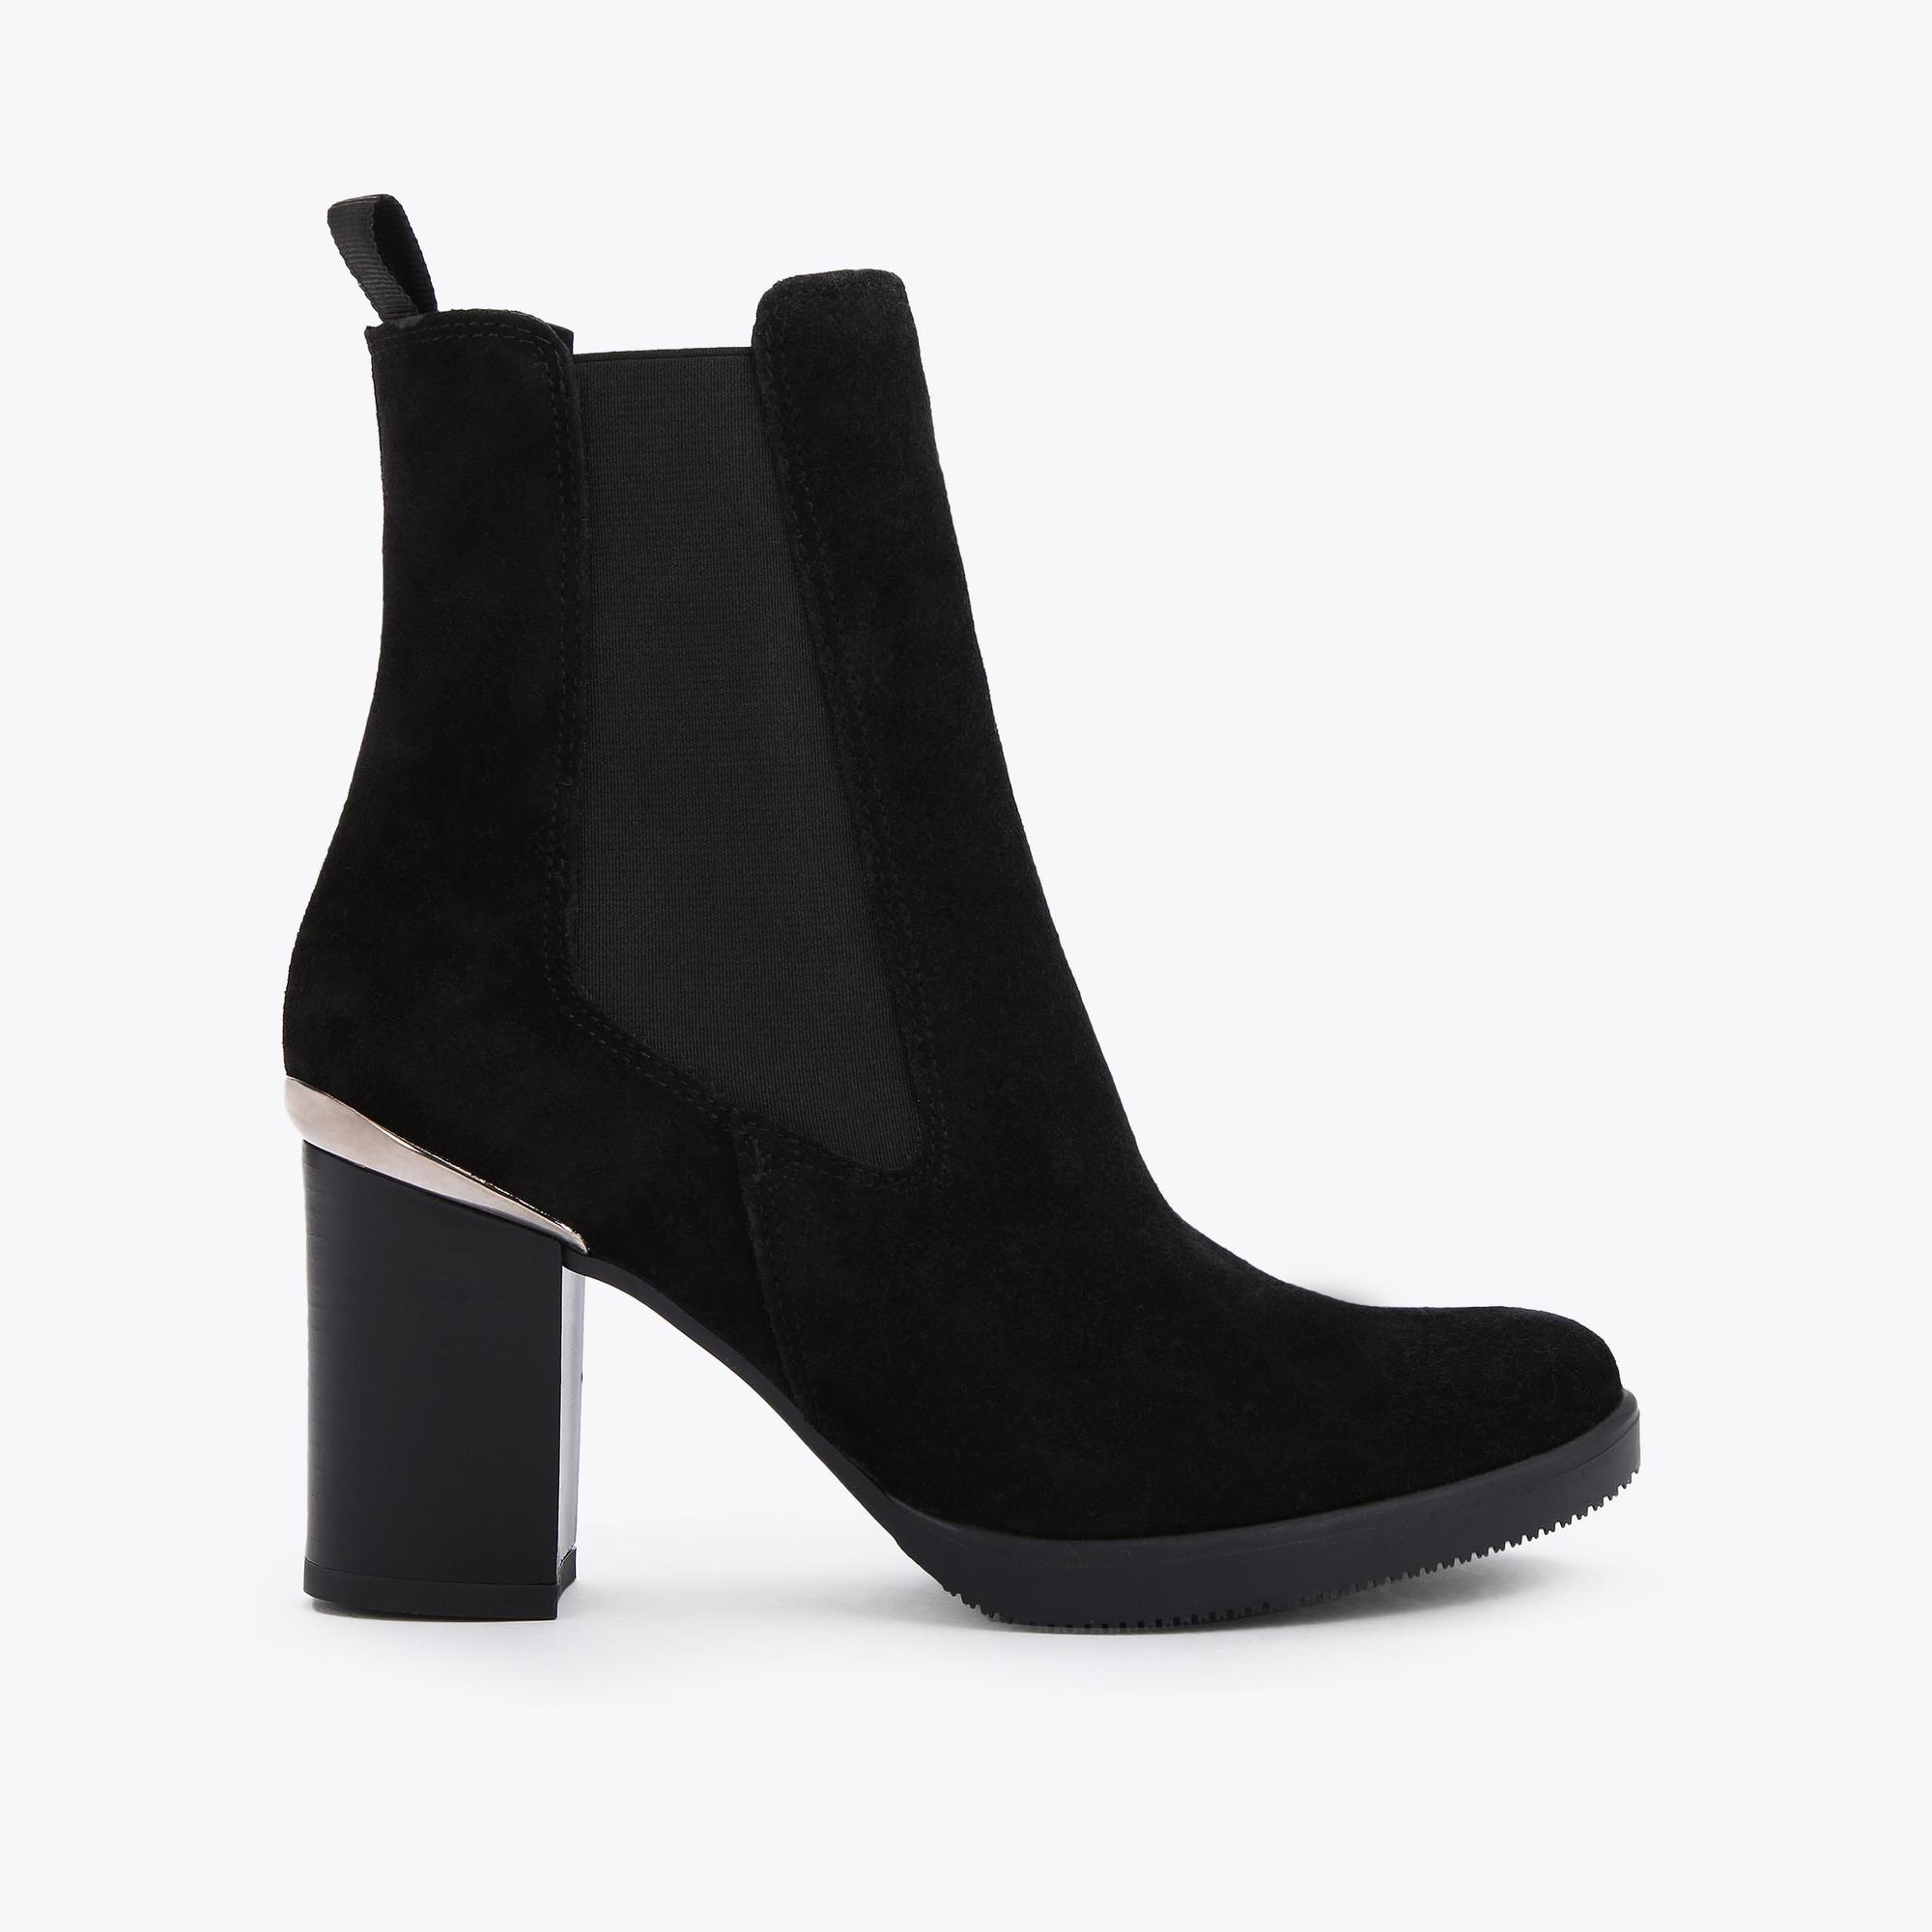 REACH ANKLE BOOT Black Suede Heeled Ankle Boots
 by CARVELA COMFORT